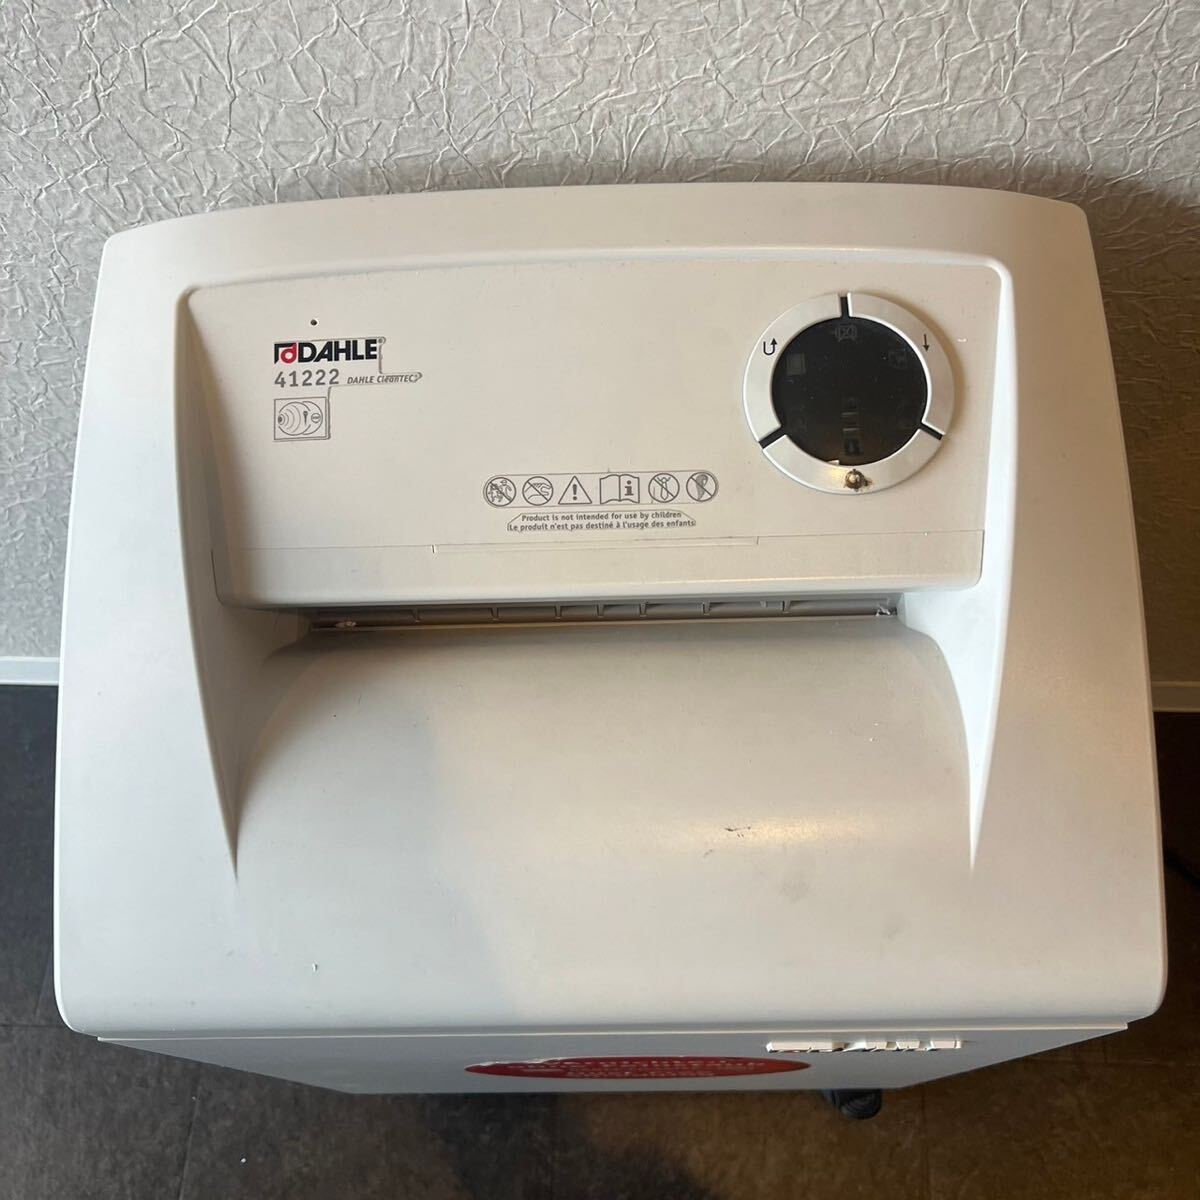 DAHLE clean Tec shredder 41222 micro Cross cut personal information business use office work supplies security Manufacturers price ¥198,000-